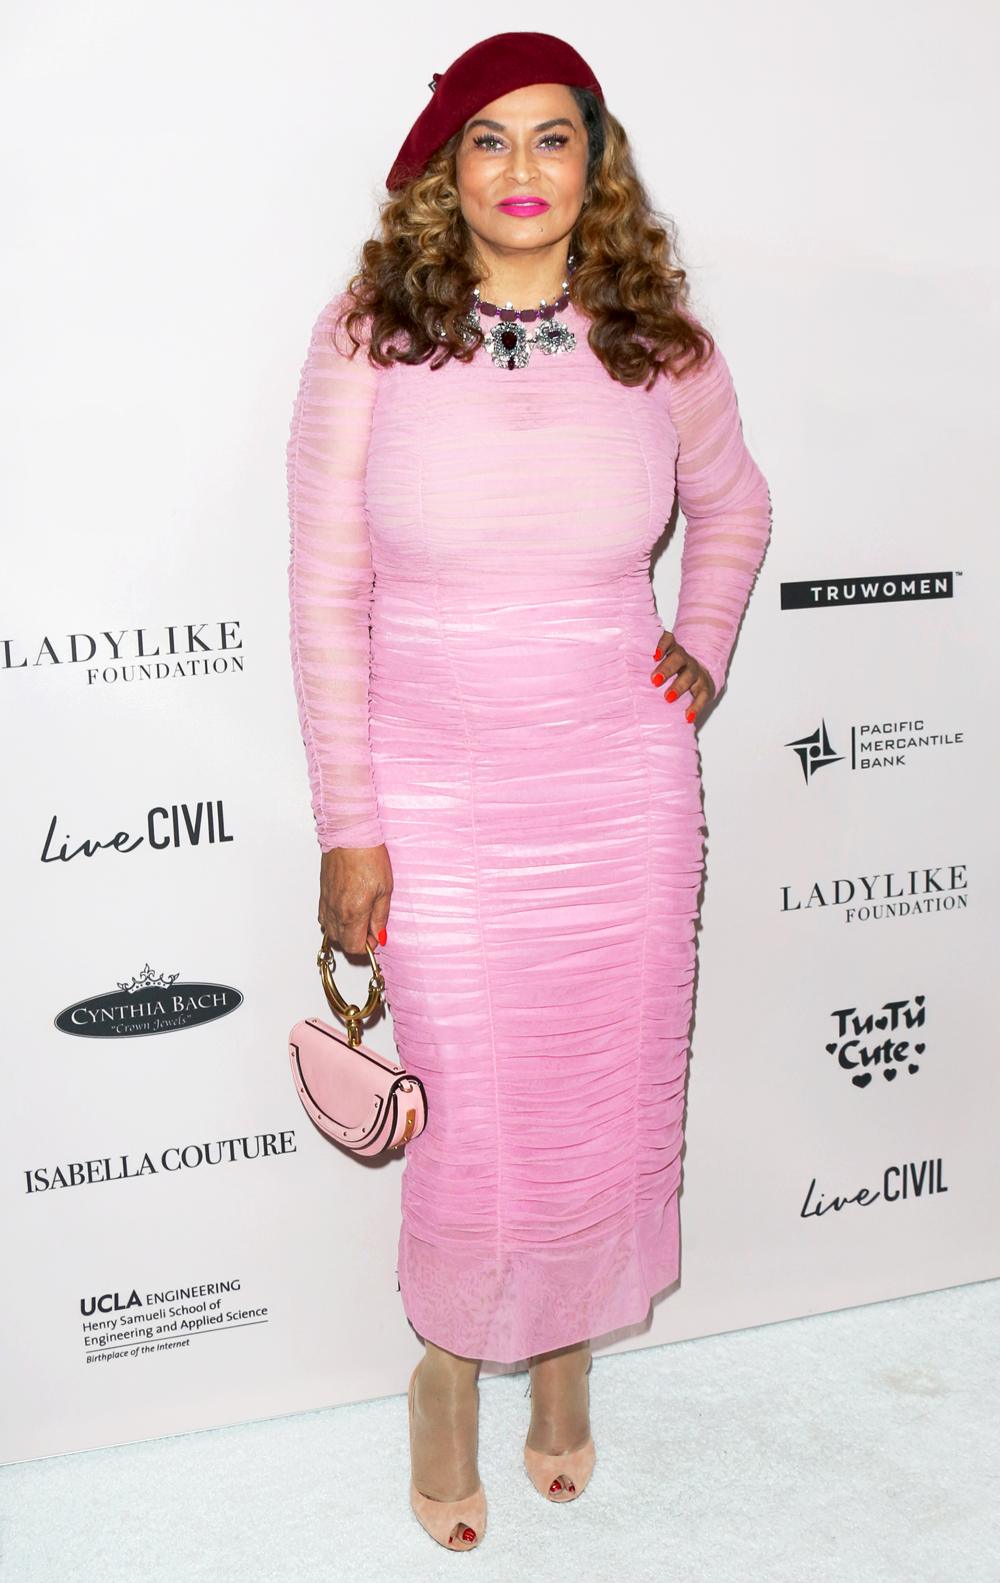 Tina Knowles attends the Ladylike Foundation's 2018 Annual Women Of Excellence Scholarship Luncheon at The Beverly Hilton Hotel on June 2, 2018 in Beverly Hills, California.